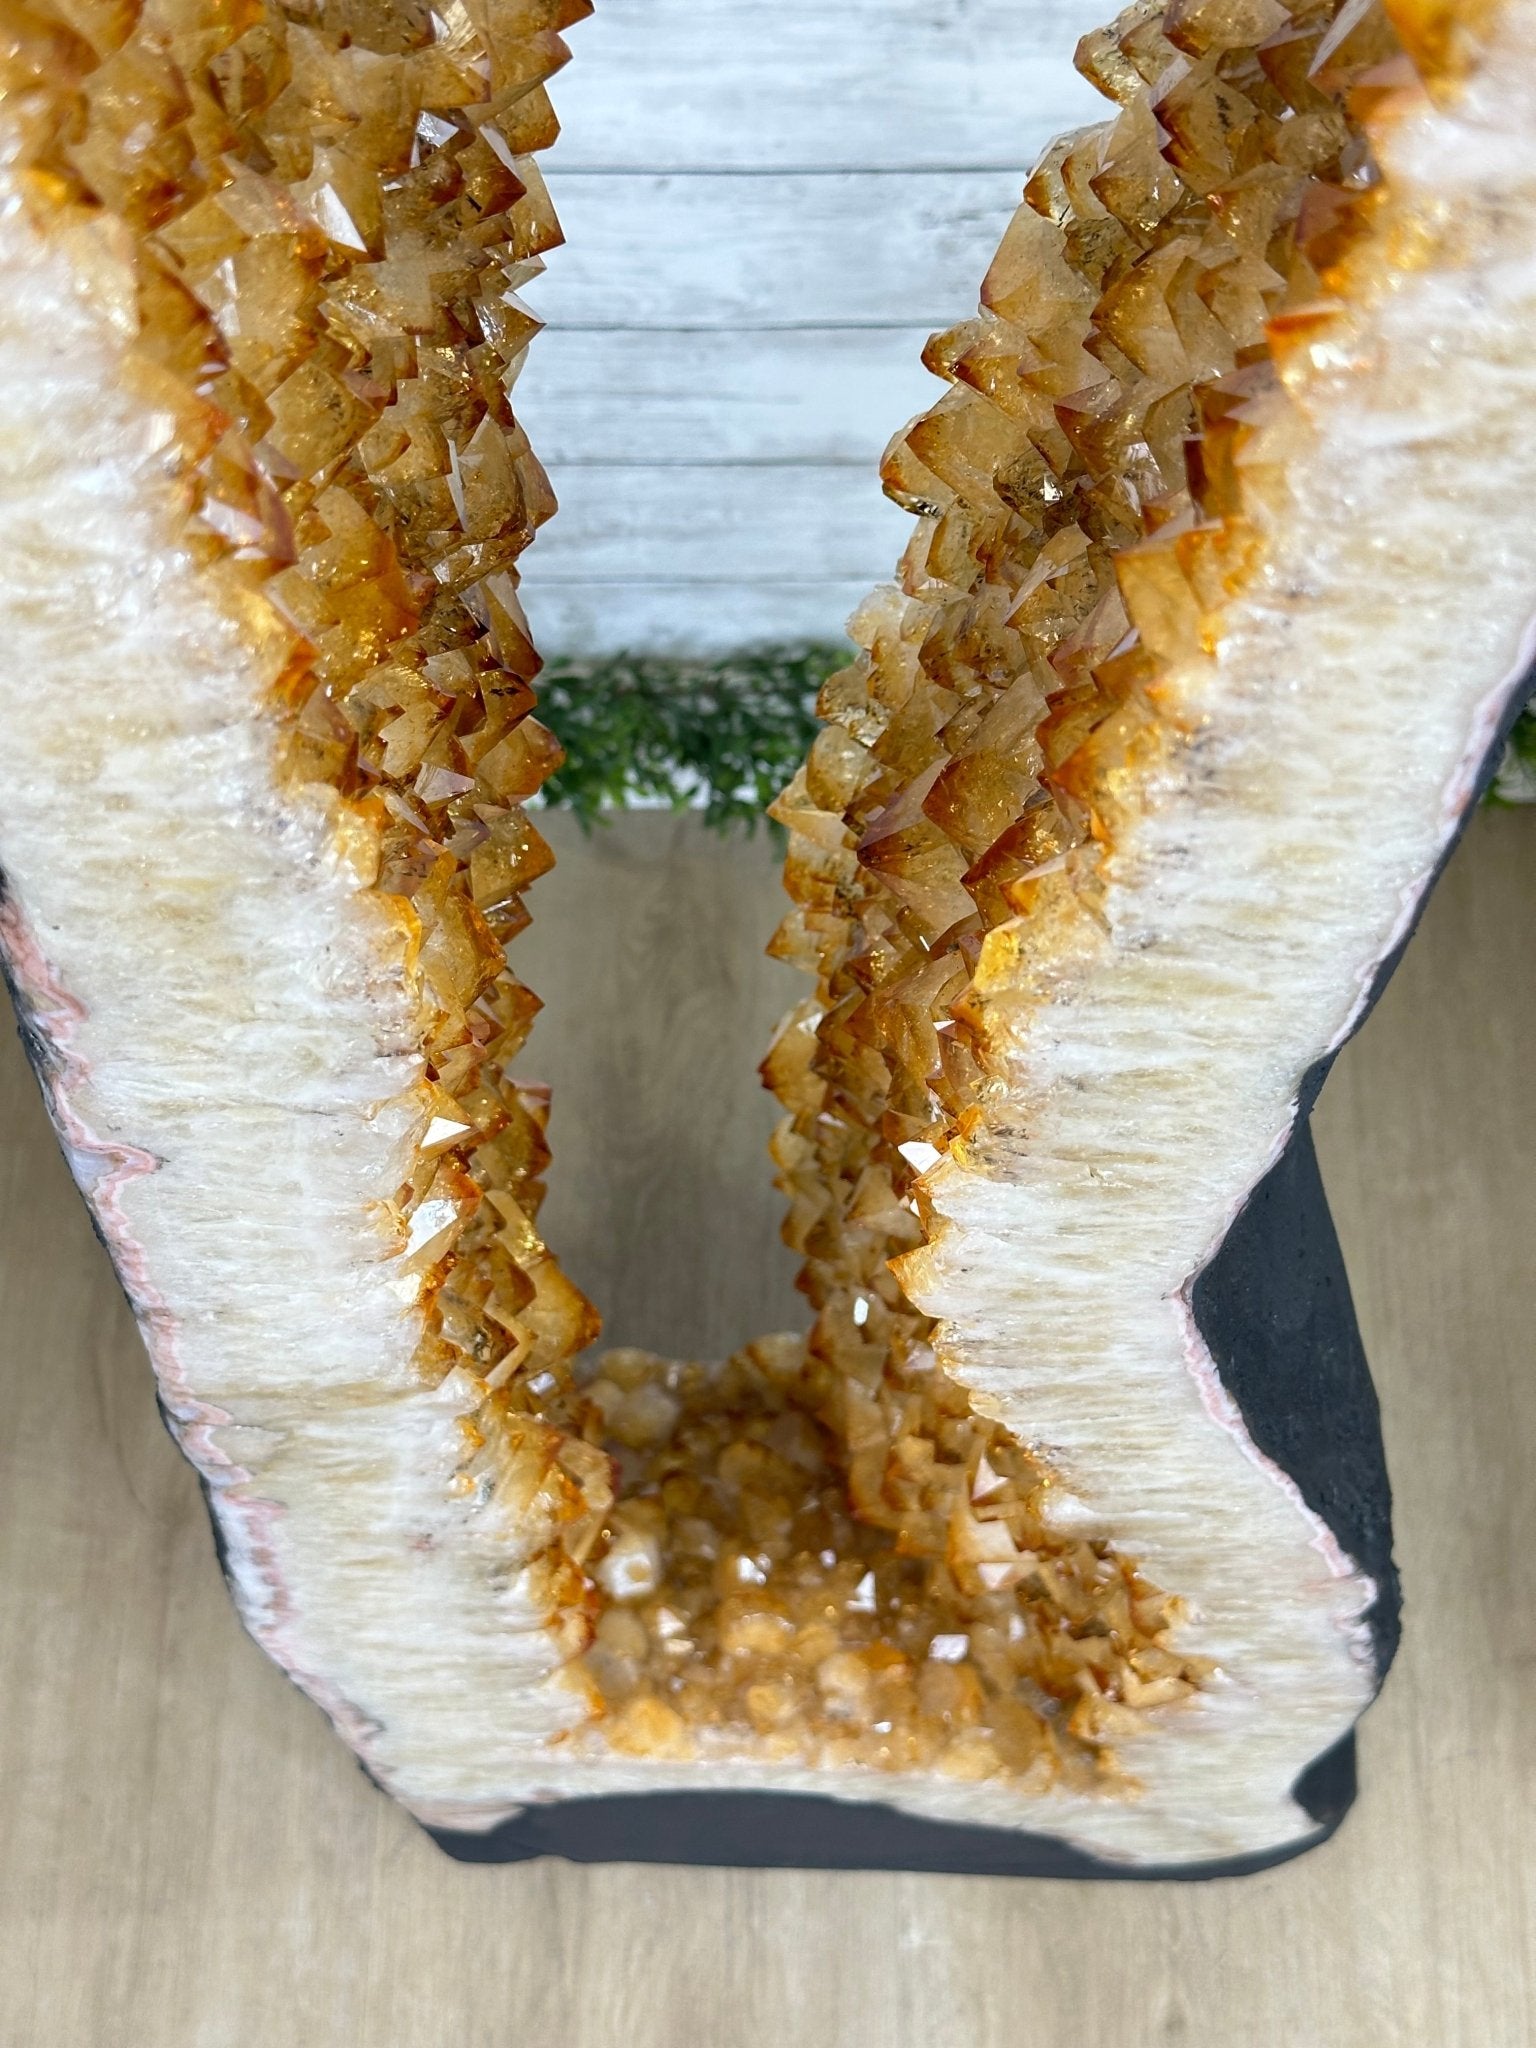 Large Open 2-Sided Brazilian Citrine Cathedral, 264.6 lbs & 64.3" tall #5608-0028 - Brazil GemsBrazil GemsLarge Open 2-Sided Brazilian Citrine Cathedral, 264.6 lbs & 64.3" tall #5608-0028Open 2-Sided Cathedrals5608-0028